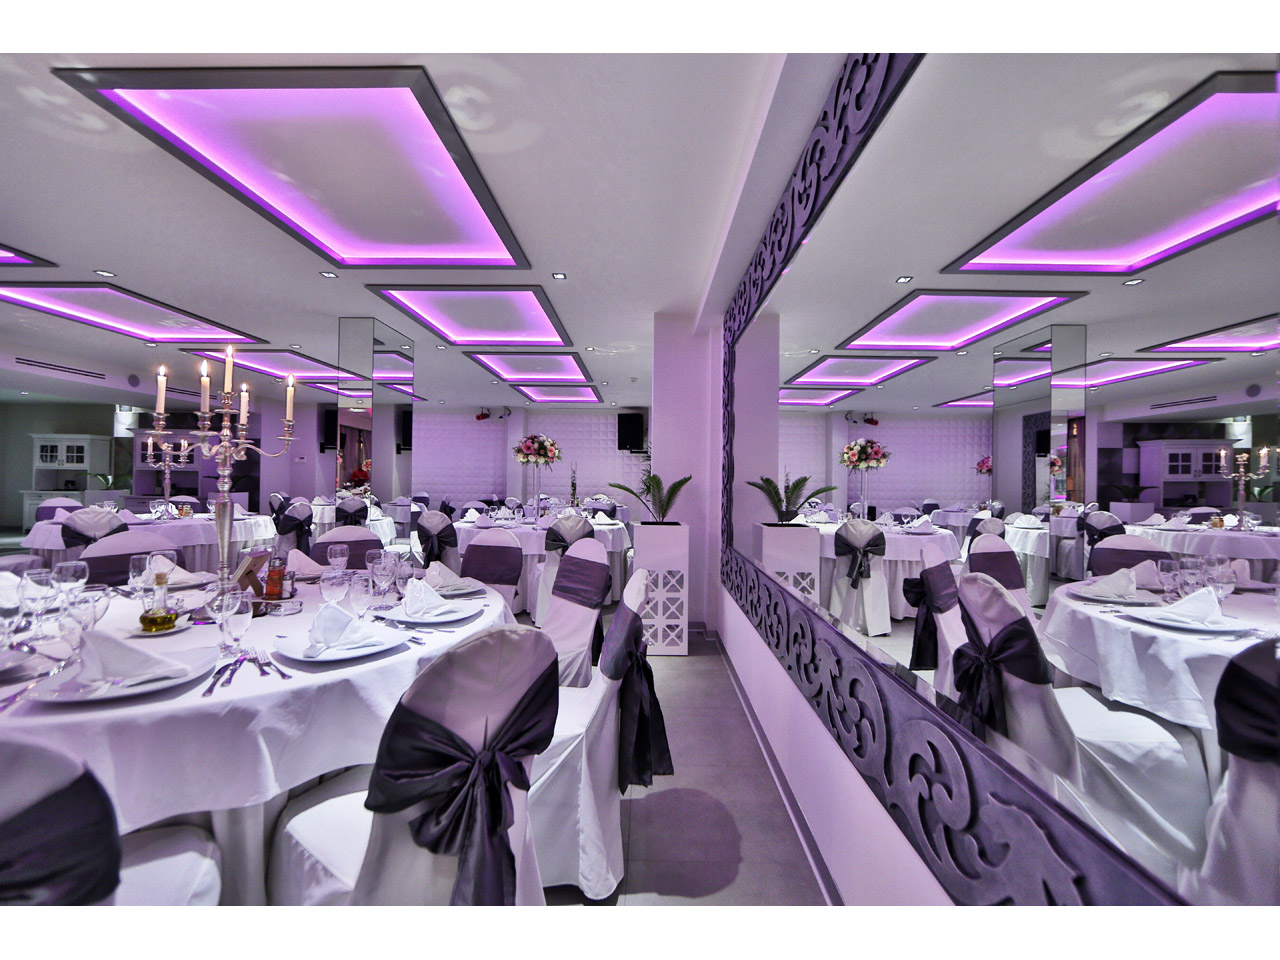 EVENTS CENTER LUX Spaces for celebrations, parties, birthdays Belgrade - Photo 4